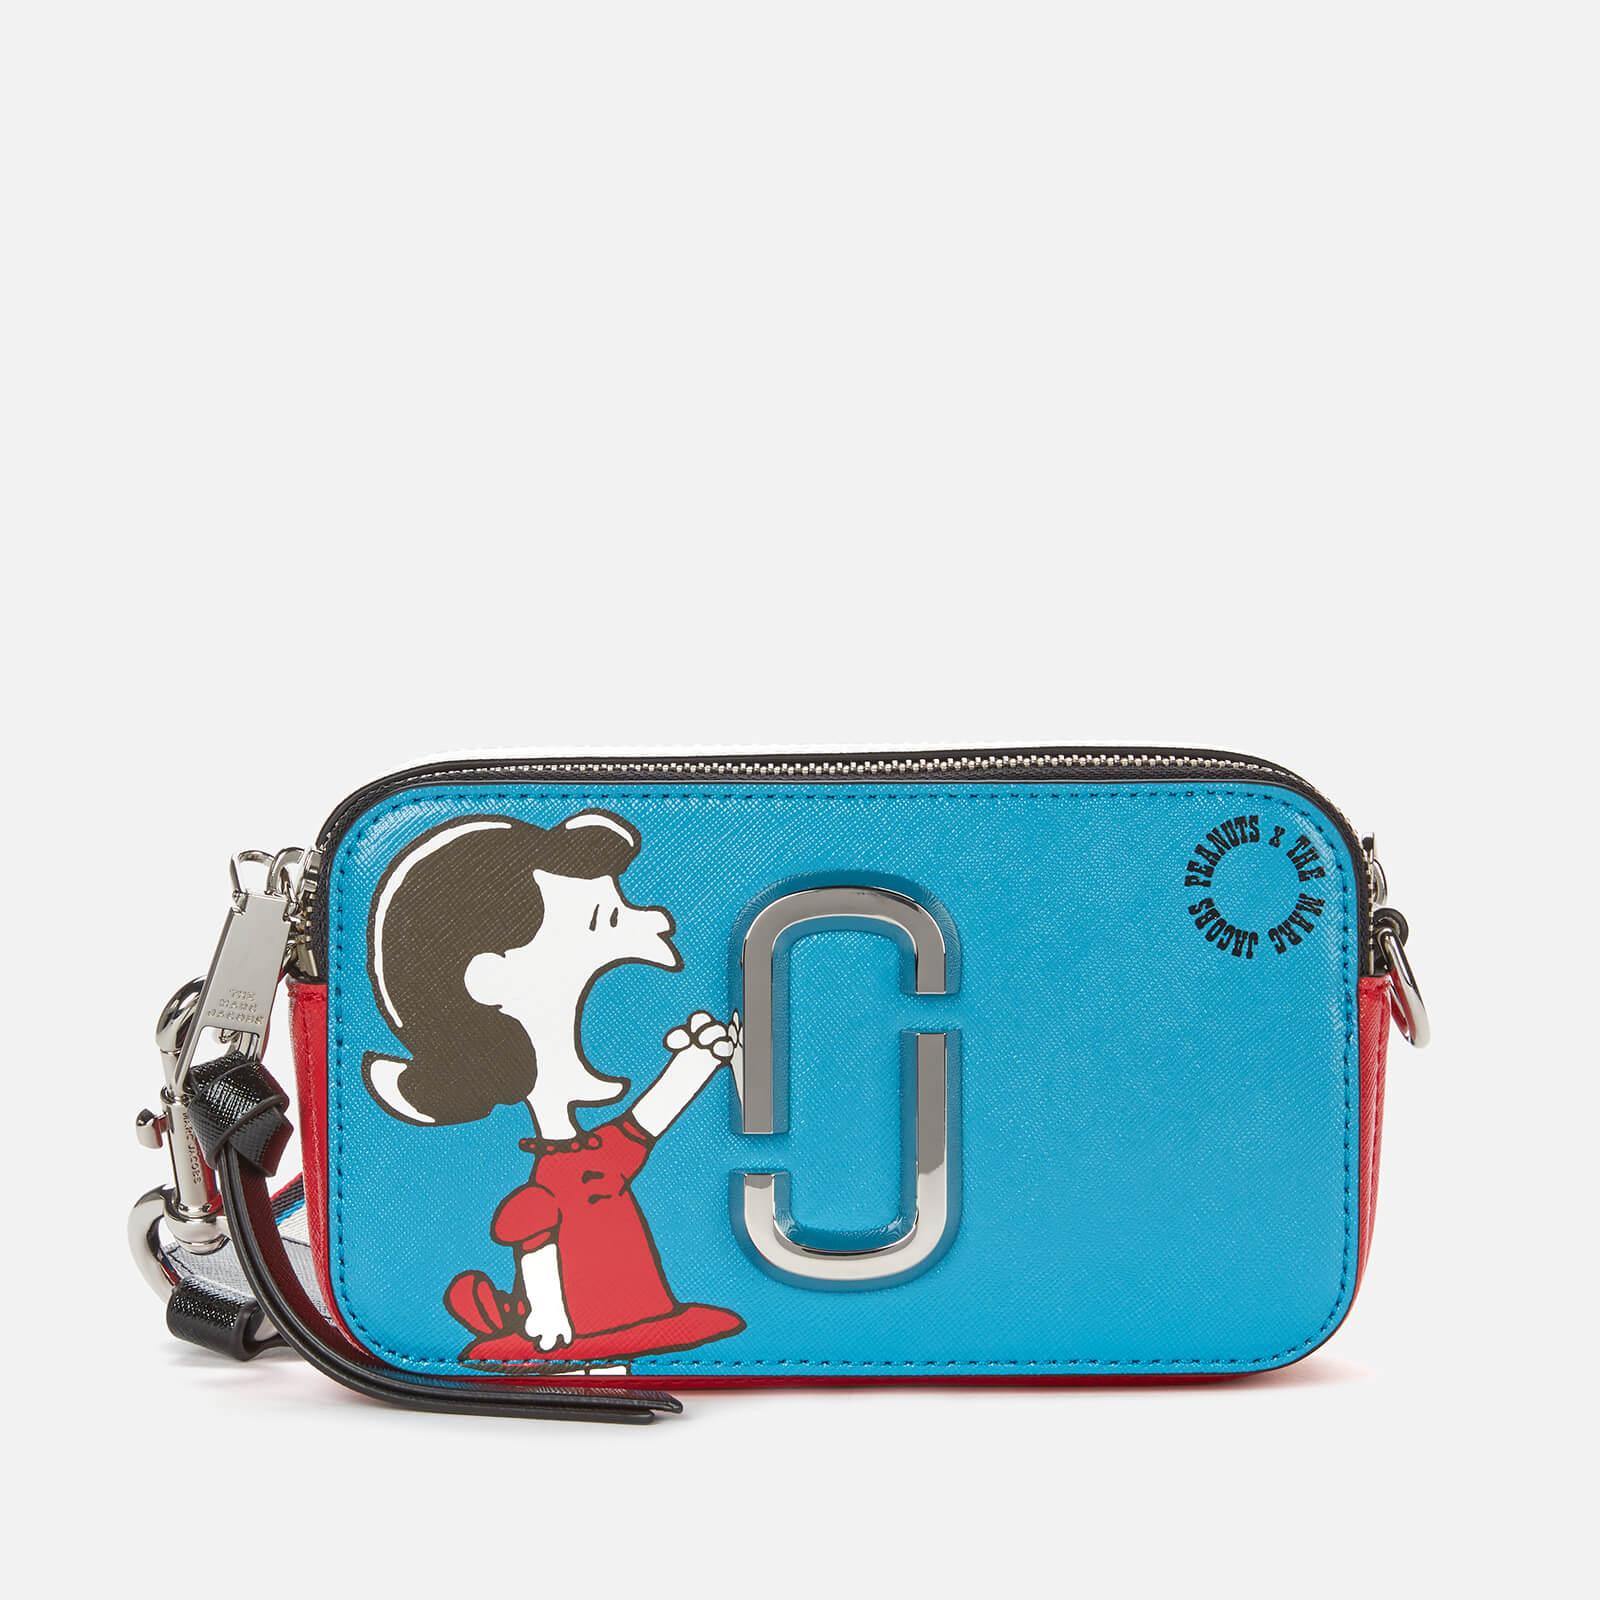 Marc Jacobs Leather Snapshot Peanuts Americana Bag in Blue/White/Red ...